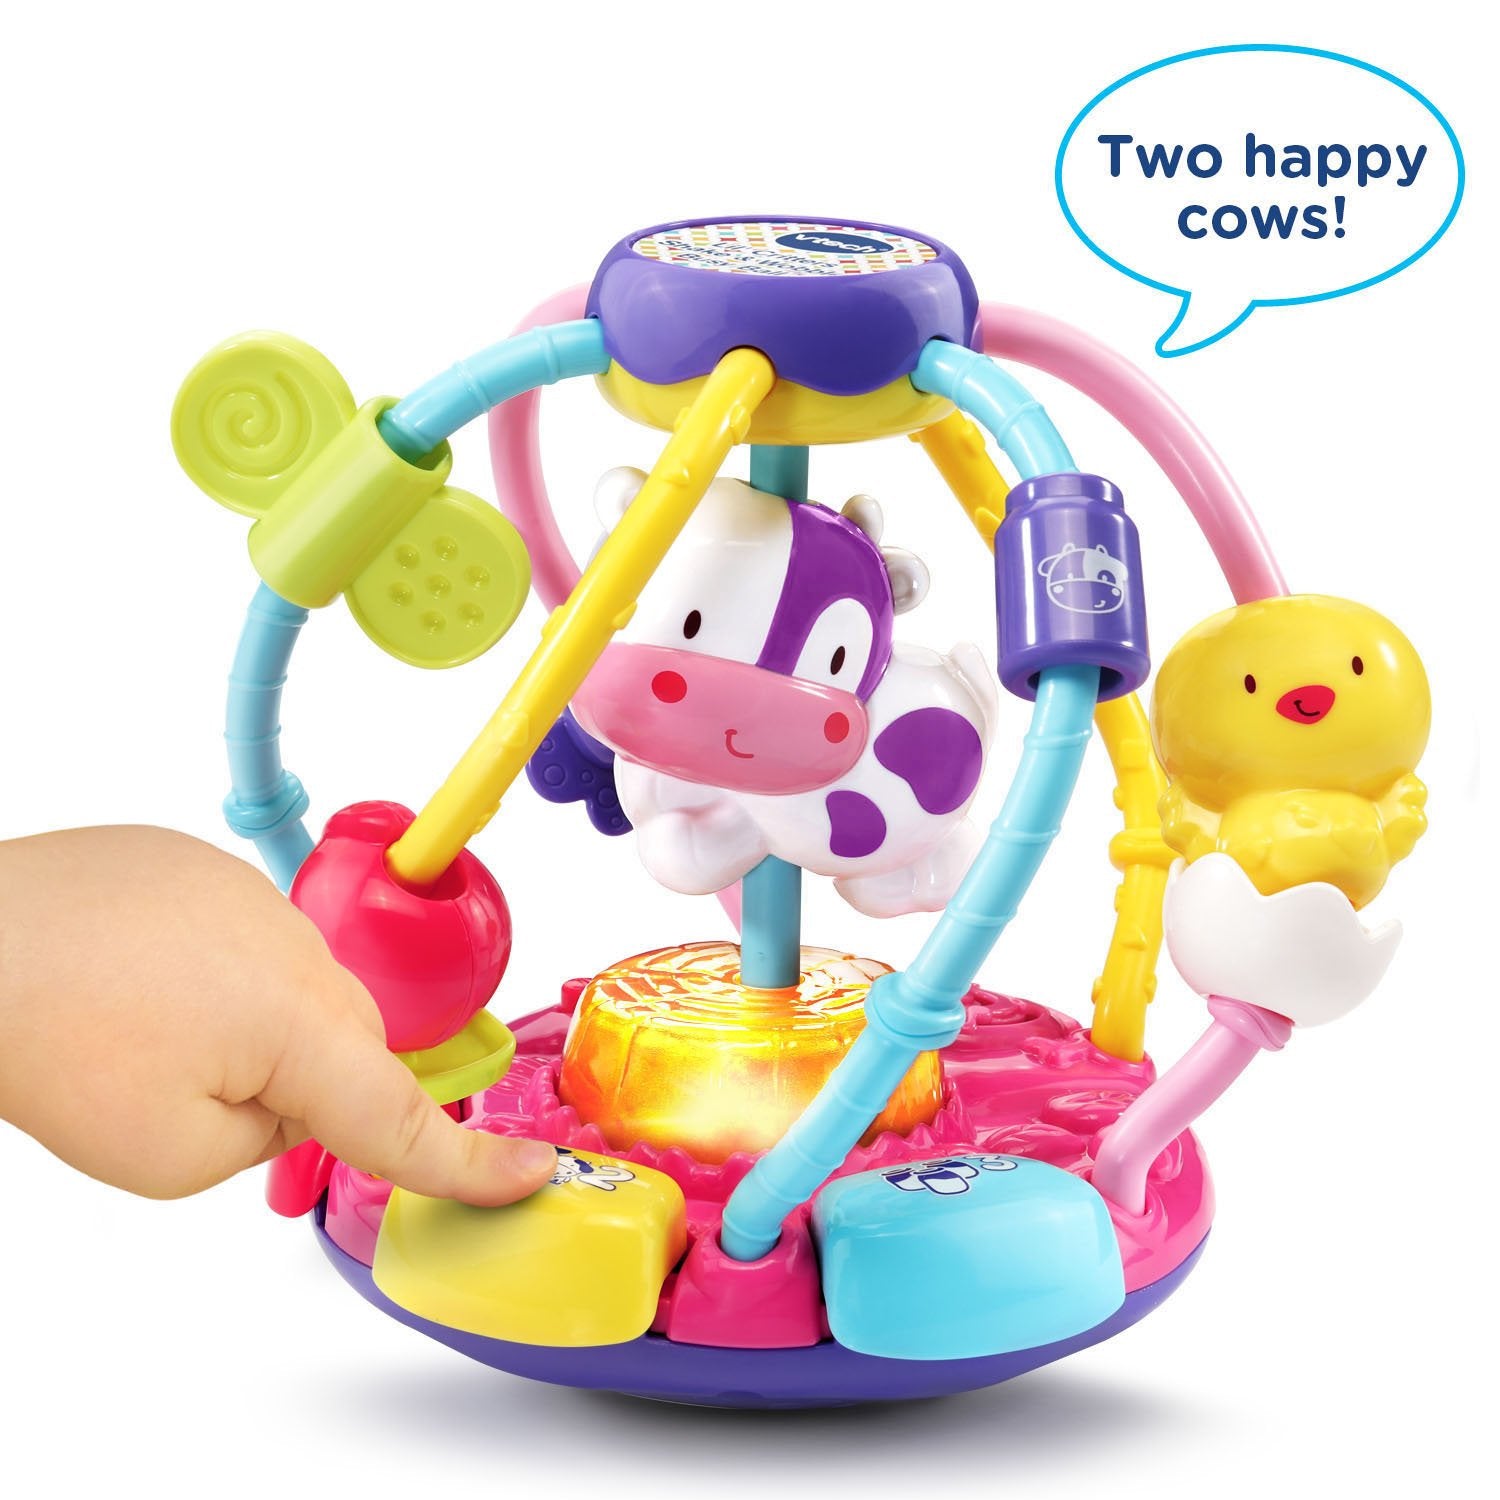 VTech Baby Lil' Critters Shake and Wobble Busy Ball Amazon Exclusive, Purple